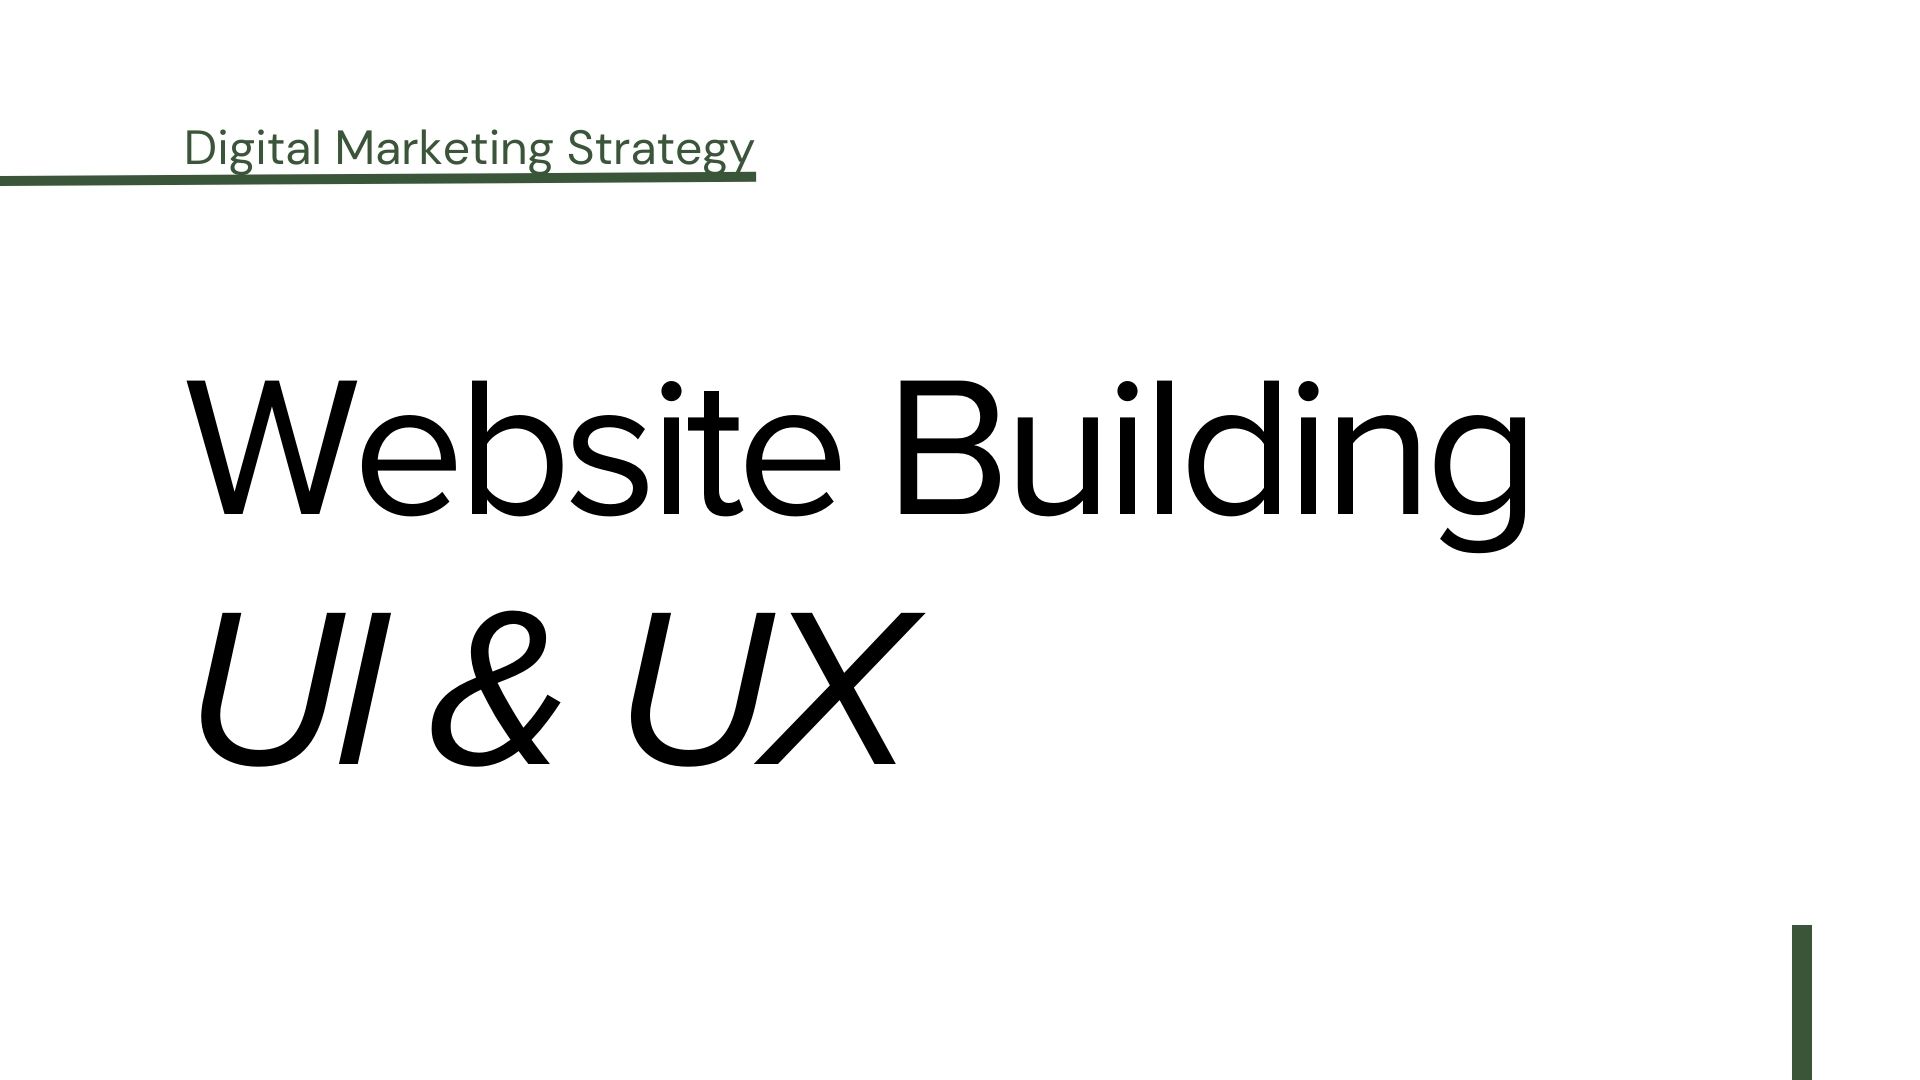 Digital Marketing Strategy: Website Building with UI&UX